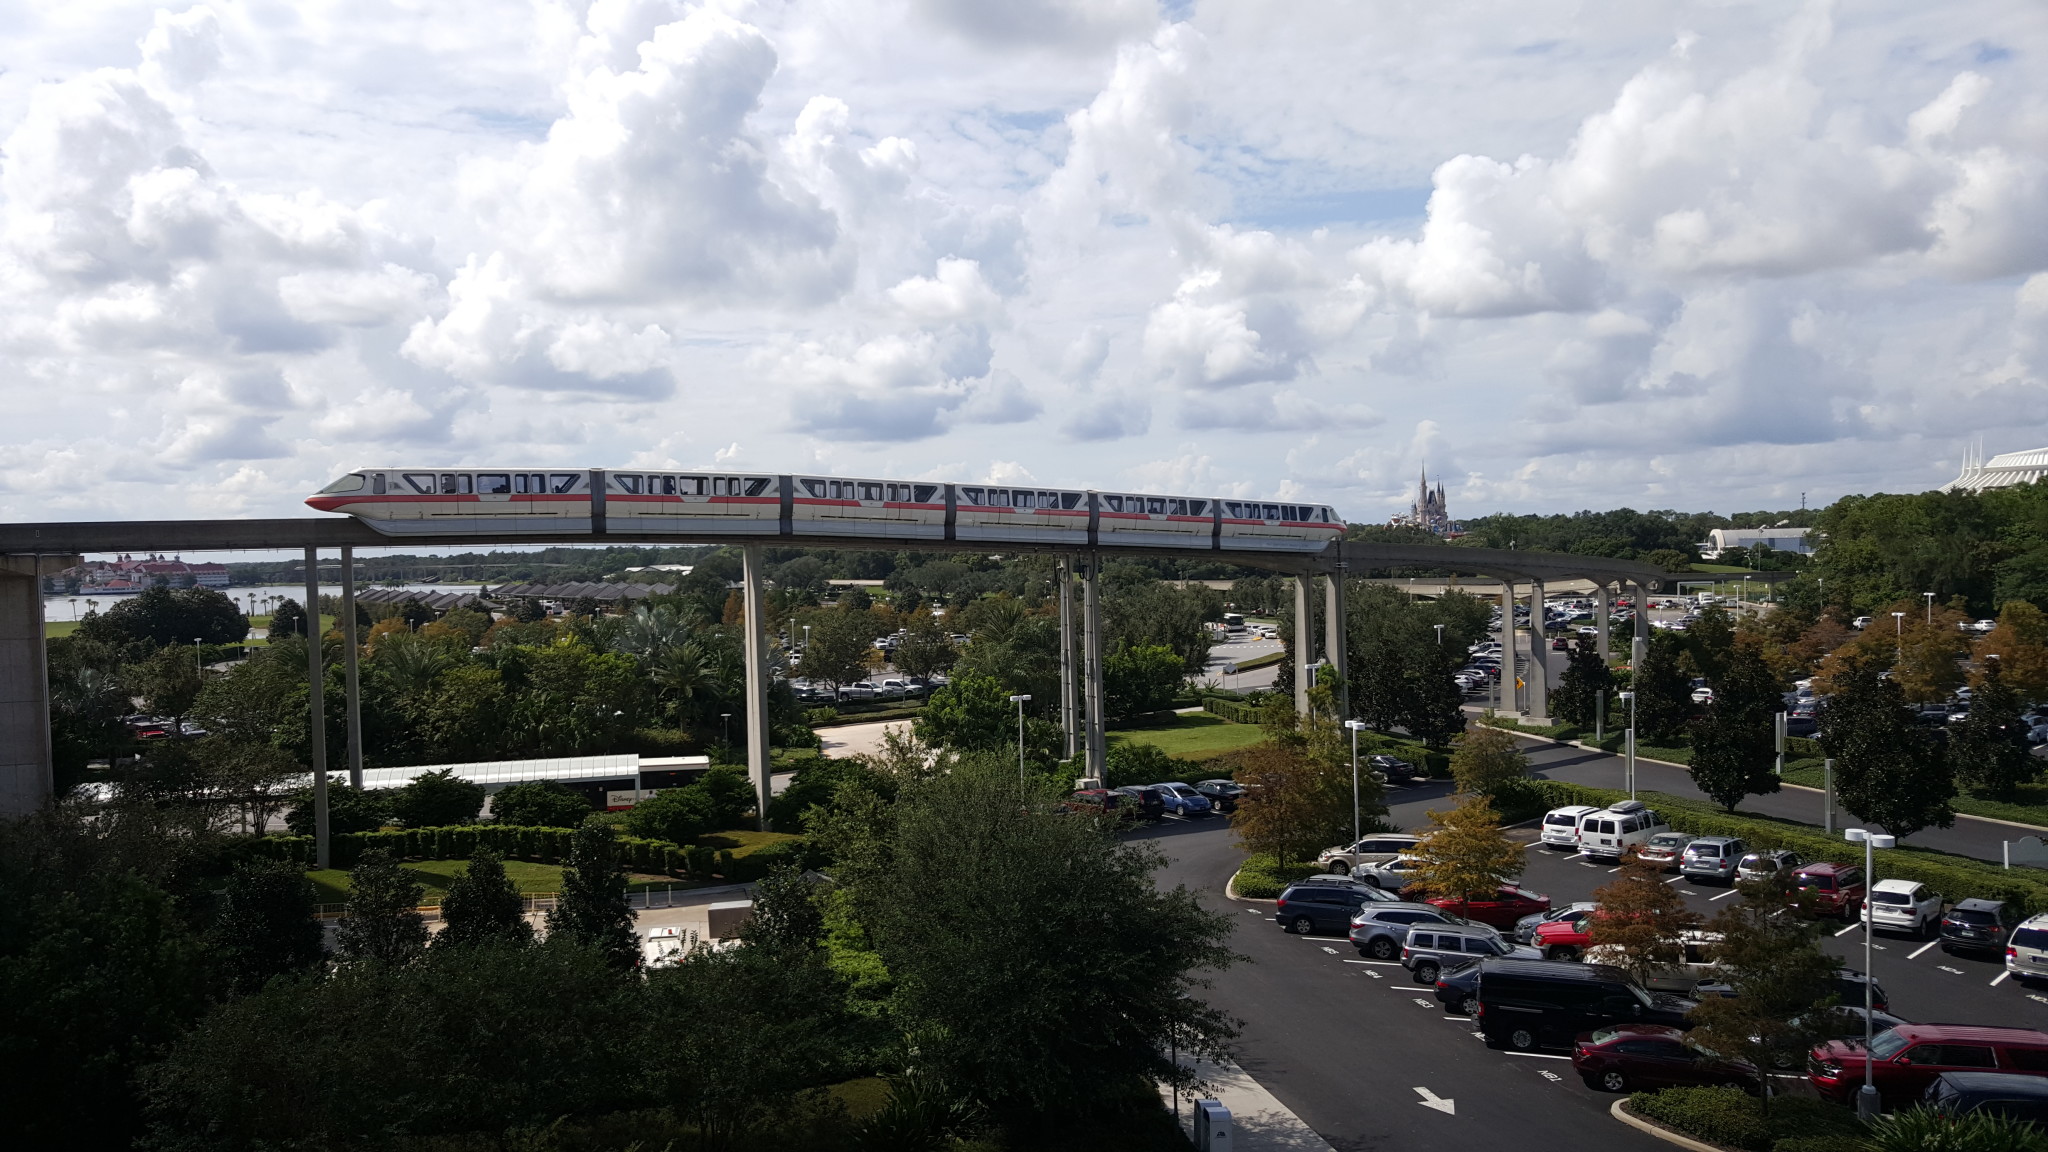 Magic Kingdom’s Express Monorail Line closed this weekend